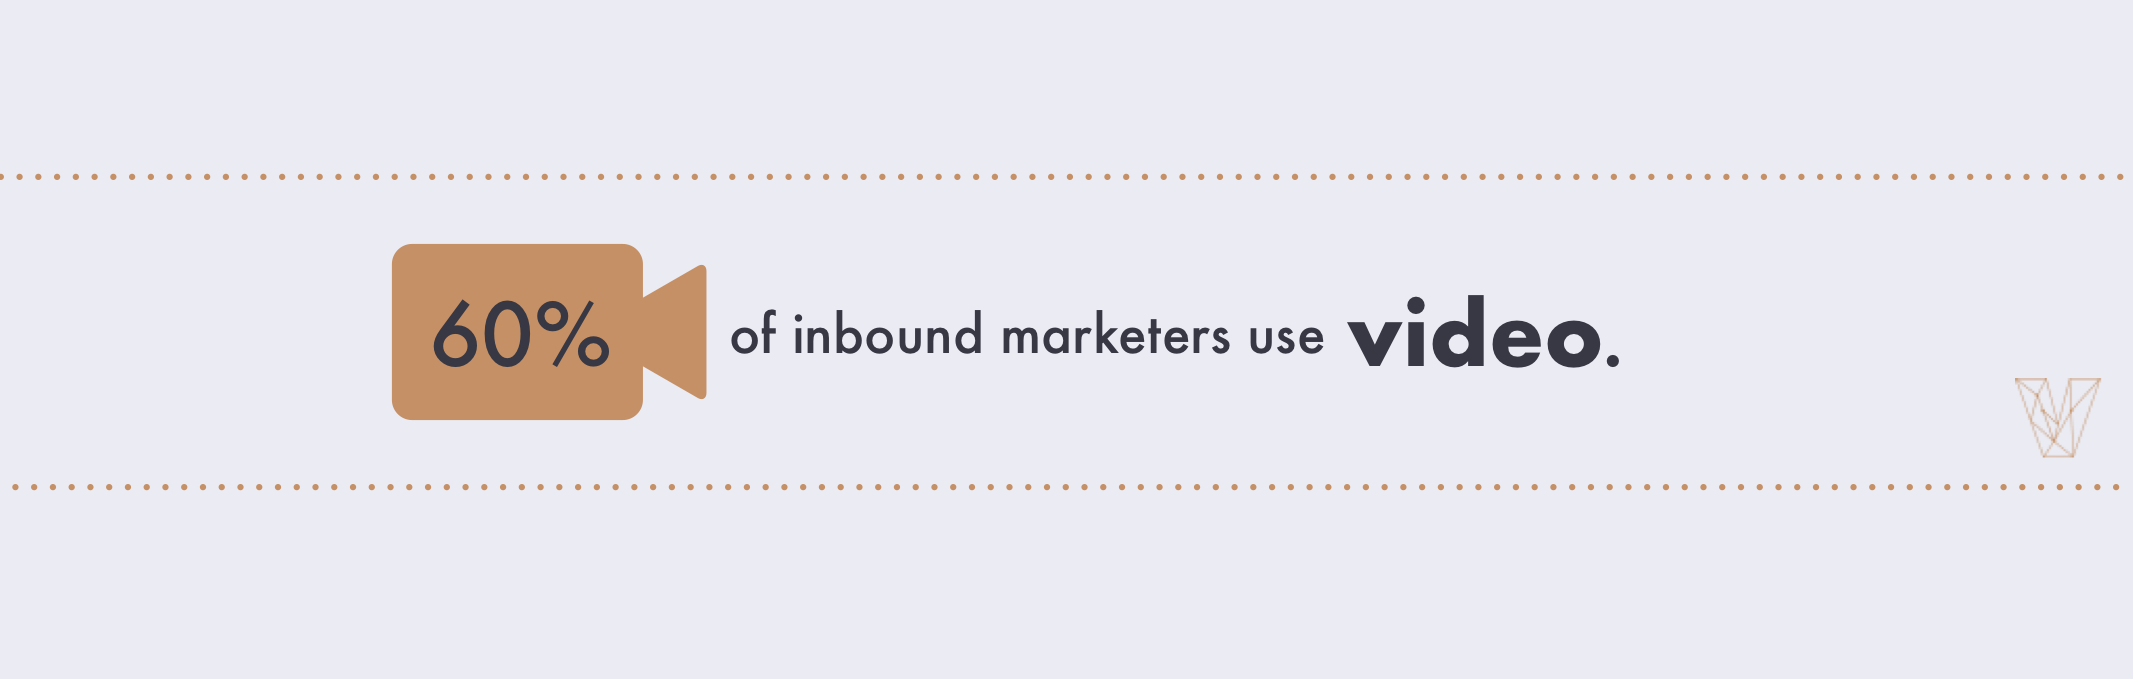 60% of inbound marketers use video